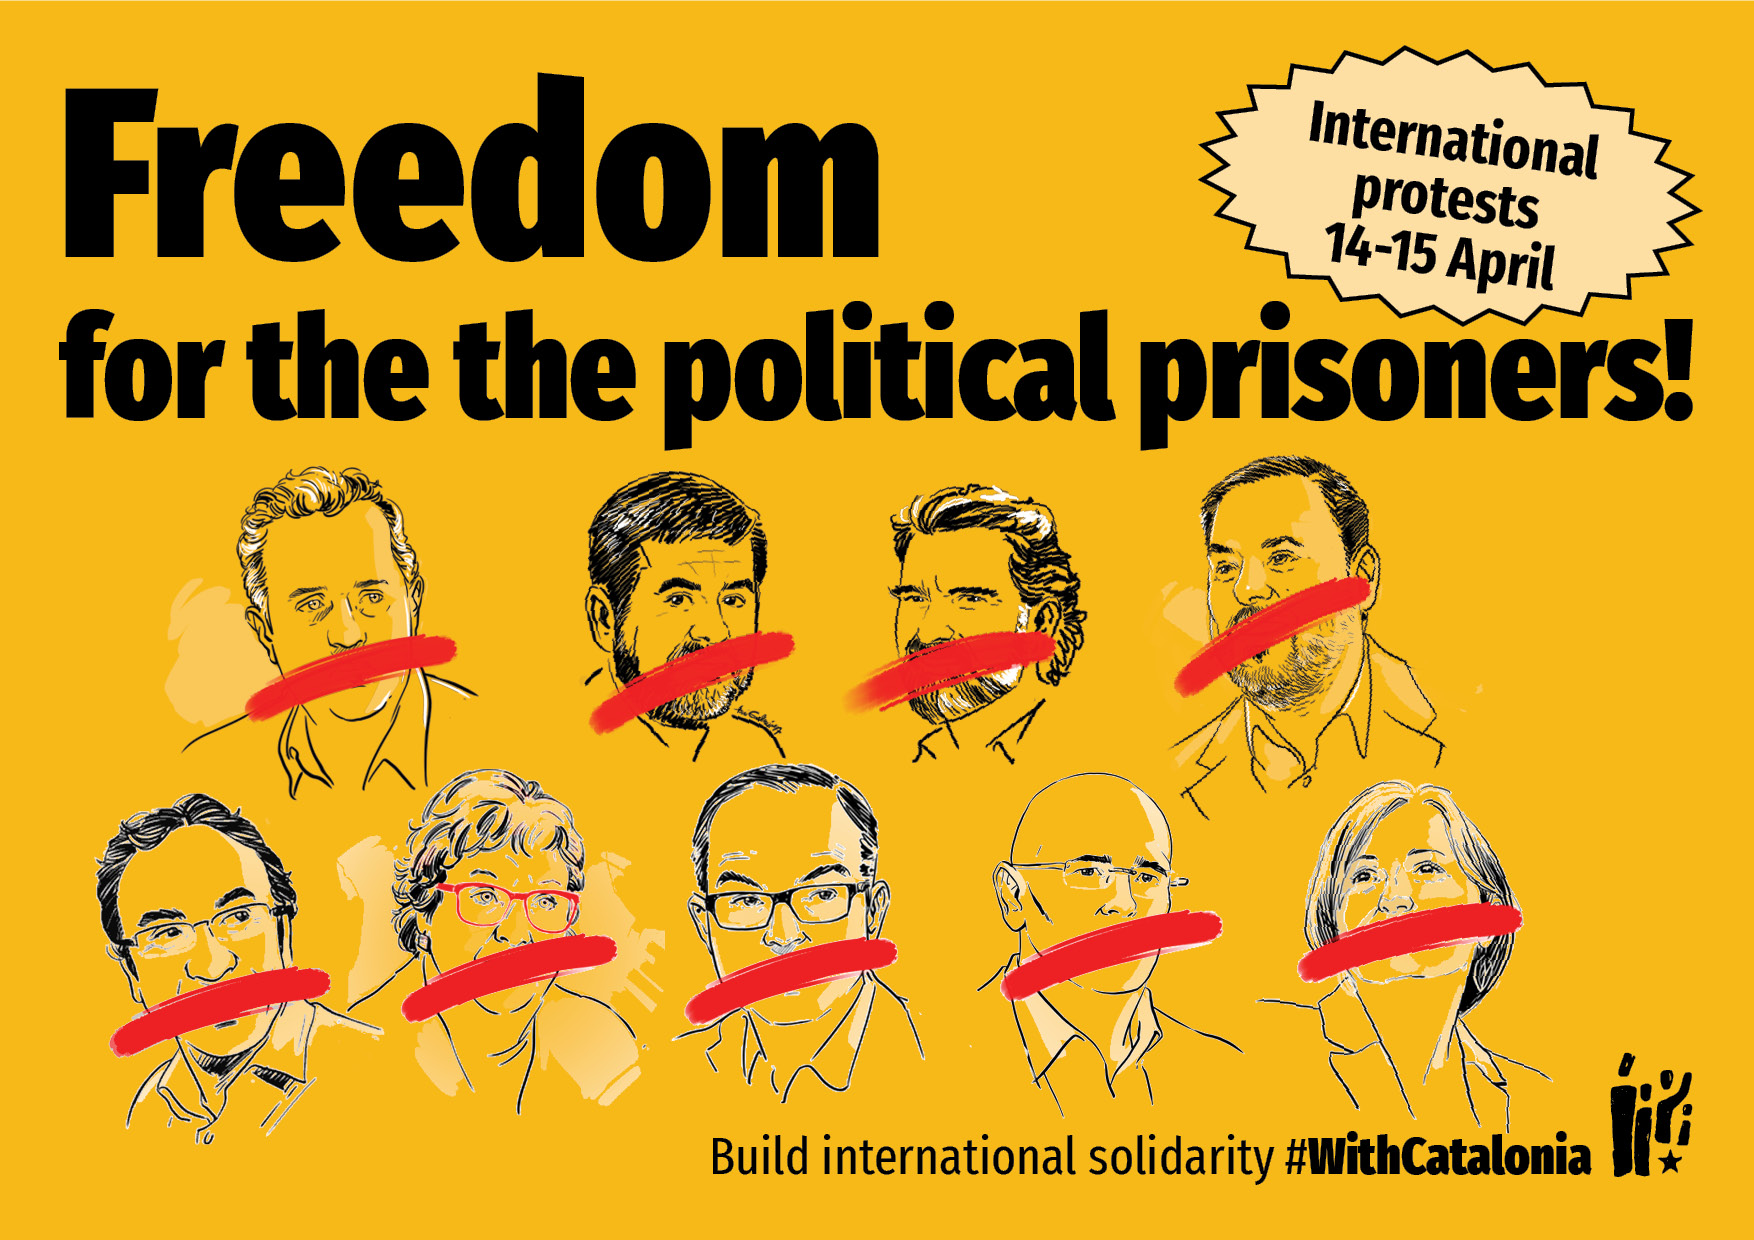 Freedom for the political prisoners